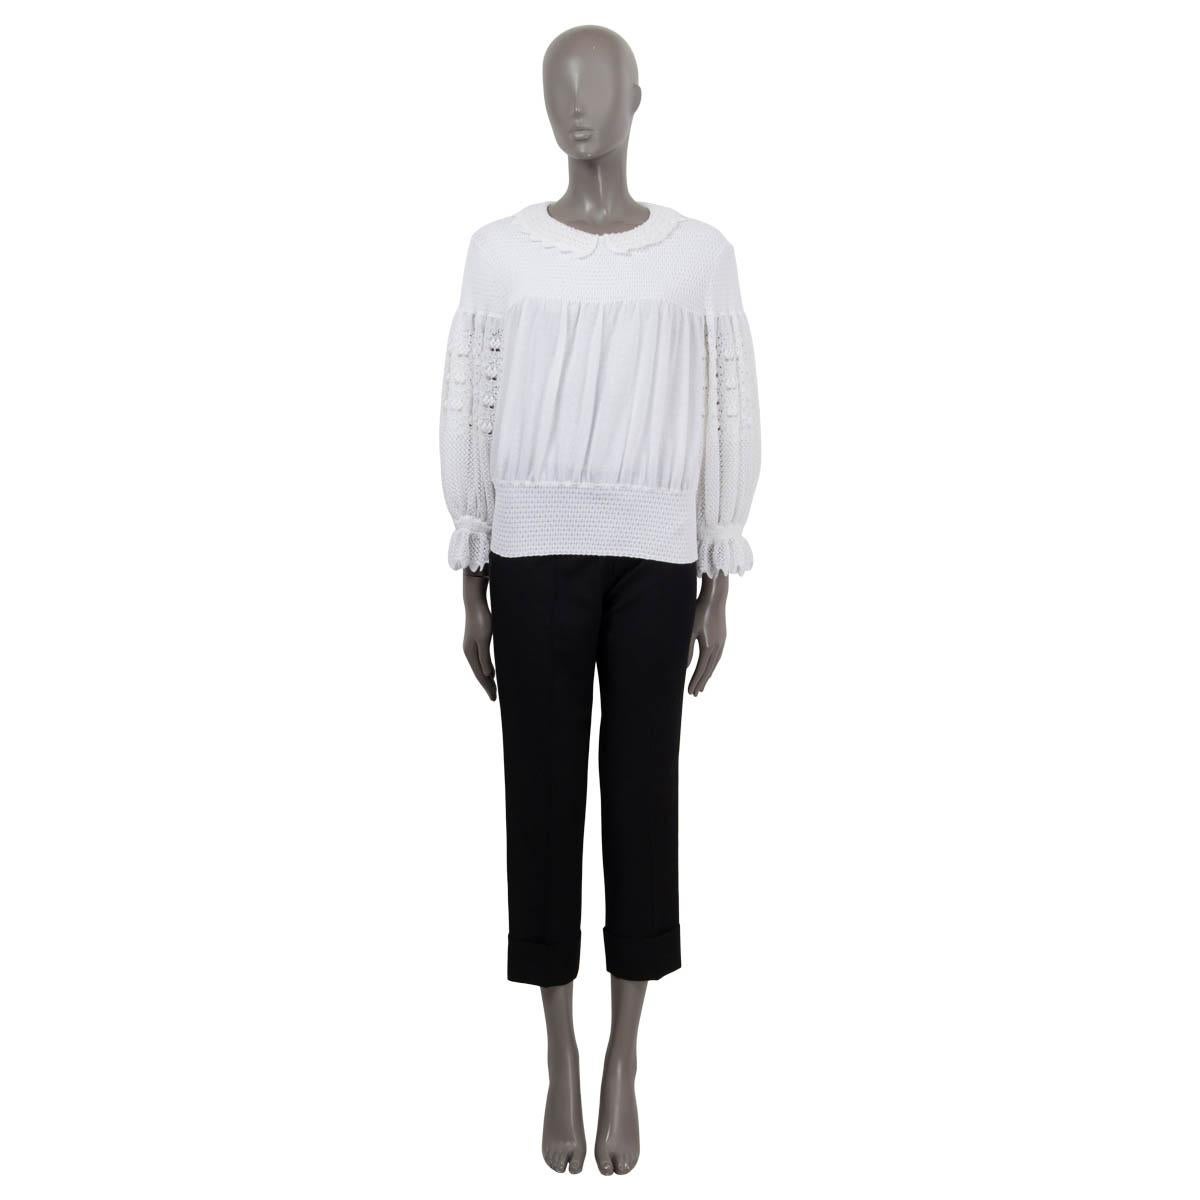 100% authentic Chanel Peter Pan collar sweater in white cotton (77%), polyamide (22%) and elastane (1%) with elastic band and scalloped edges on cuffs and collar. The design features three light gold-tone logo and pearl embellished buttons on the